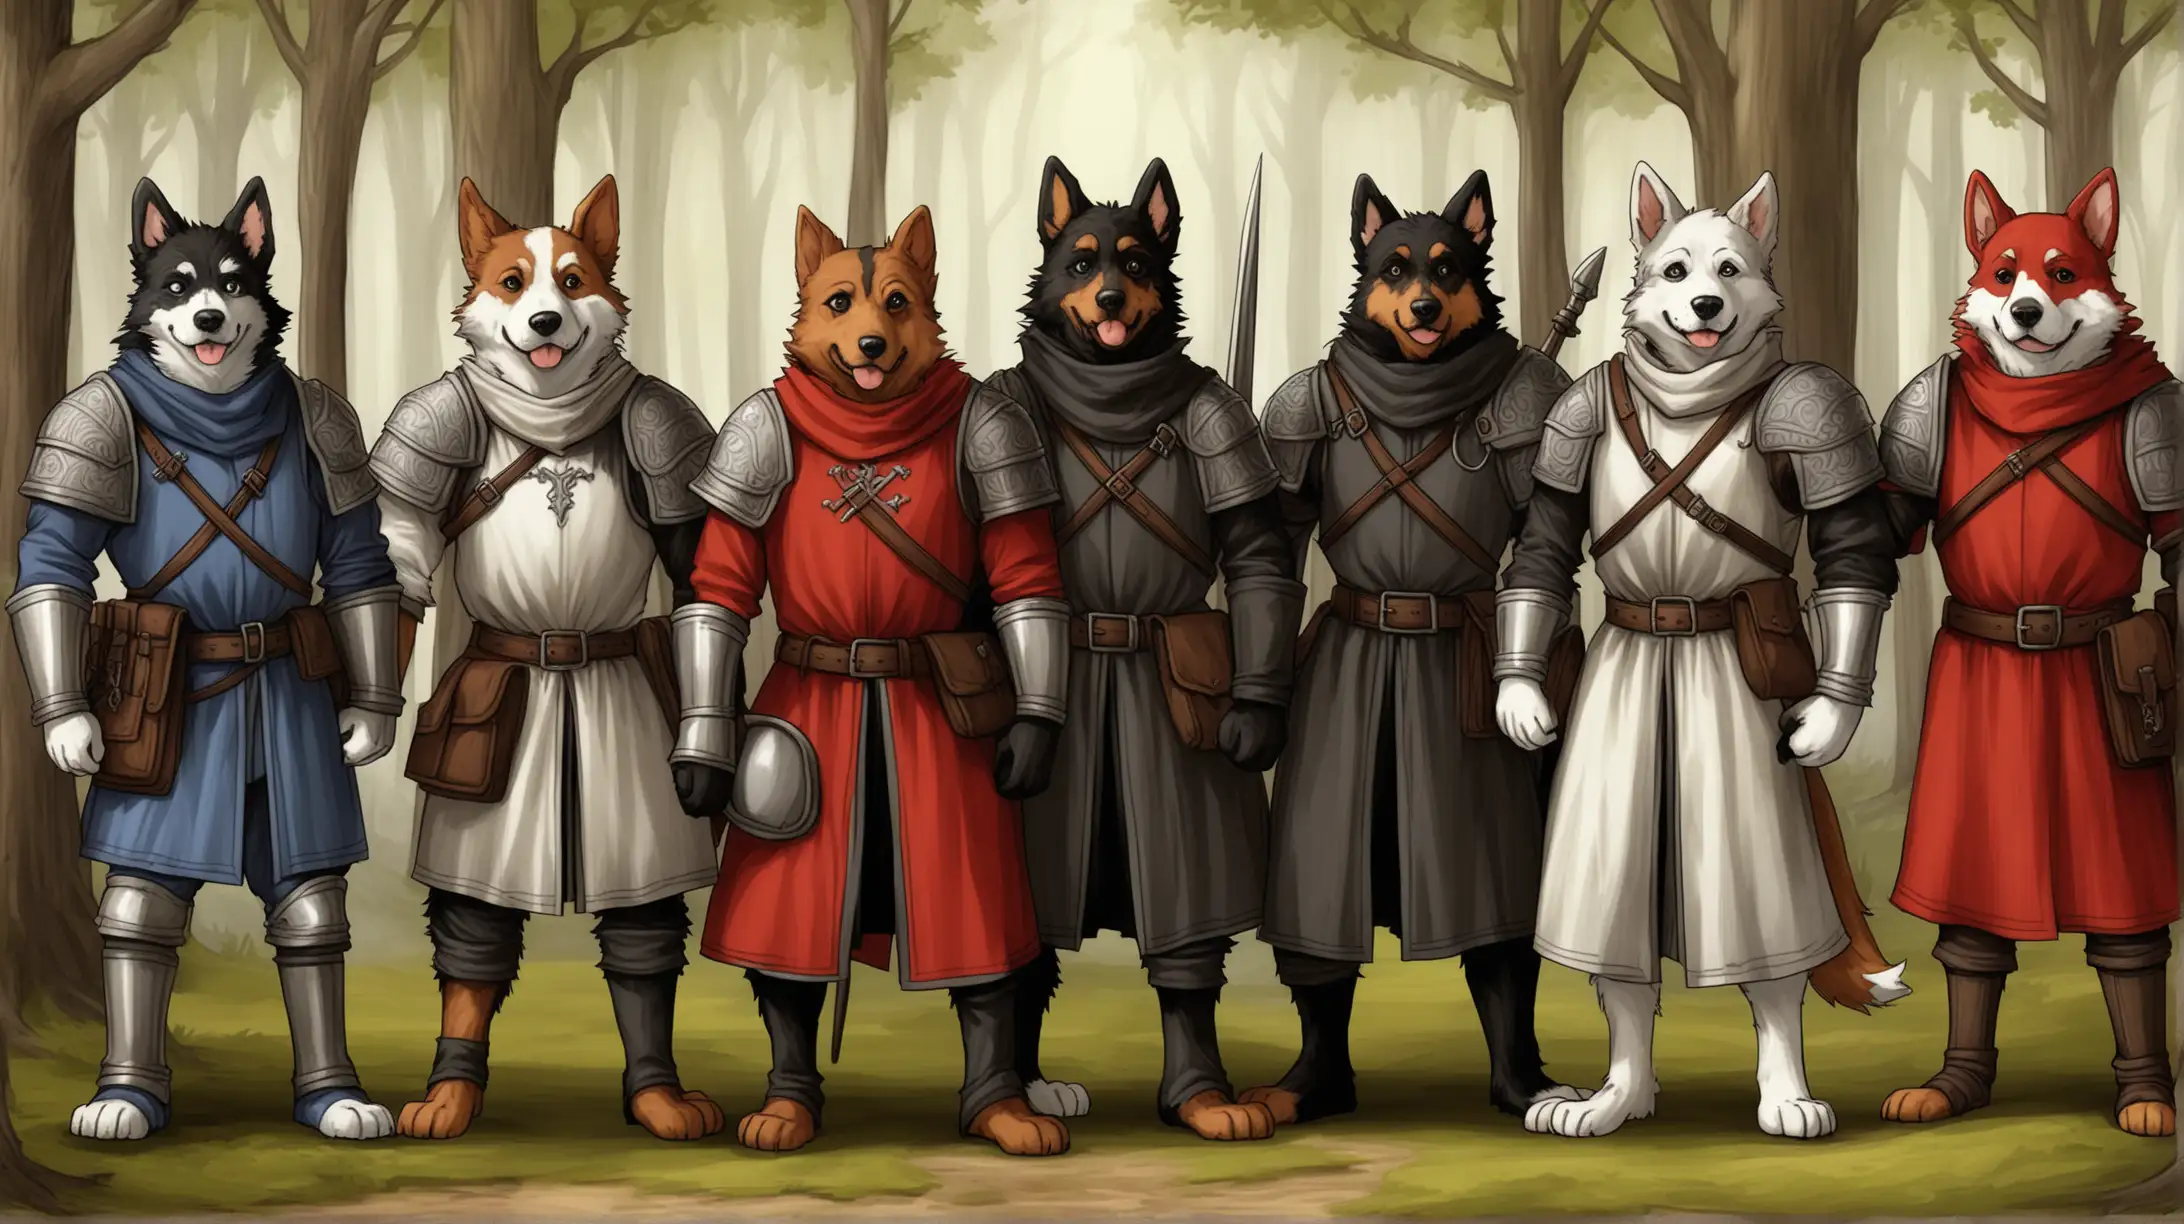 dog folk, brown black white gray red, furry, rangers and guards, woods, Medieval fantasy